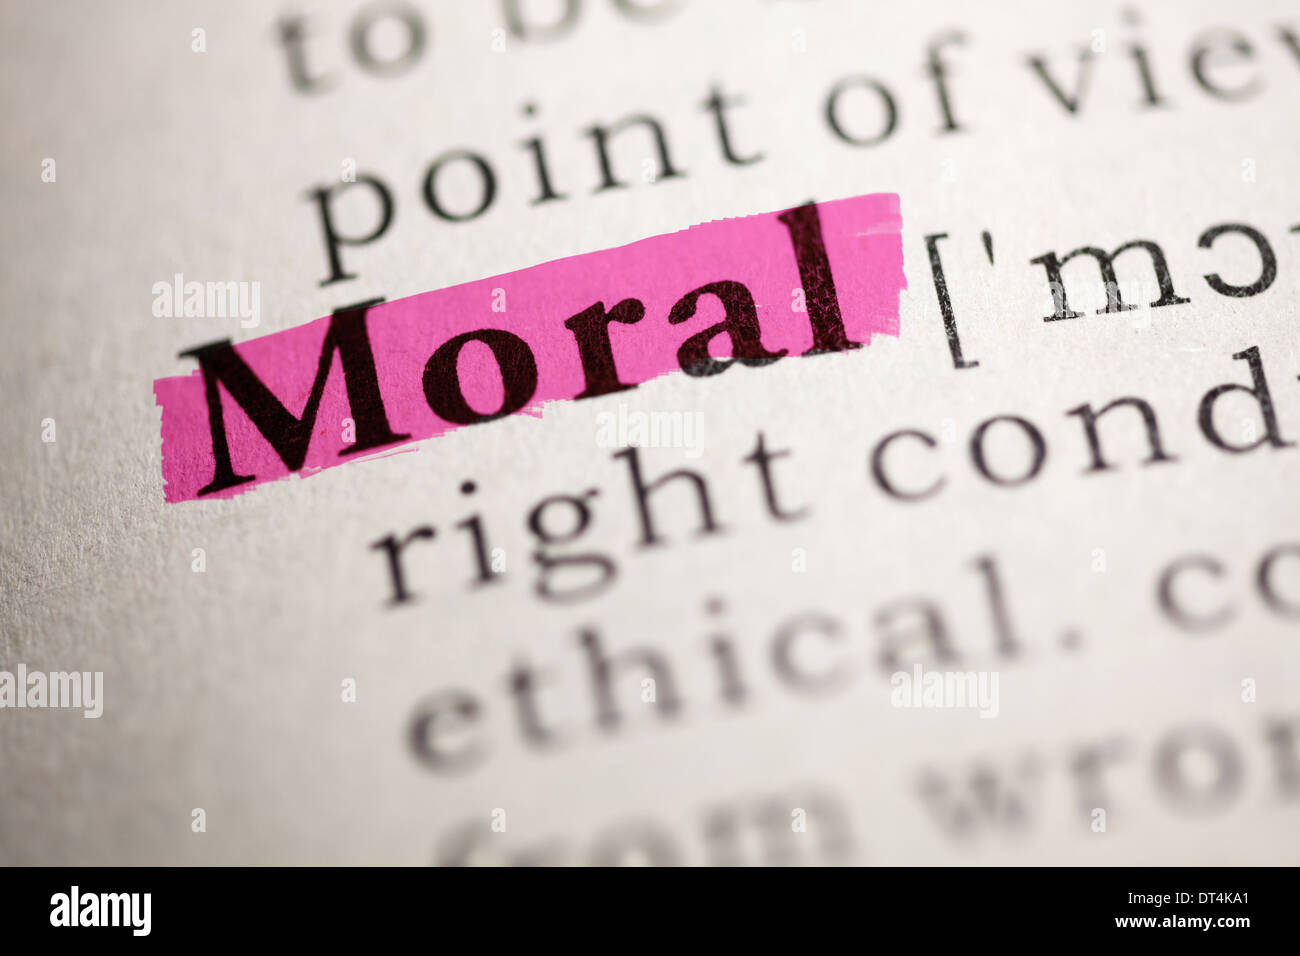 Fake Dictionary, Dictionary definition of the word Moral. Stock Photo